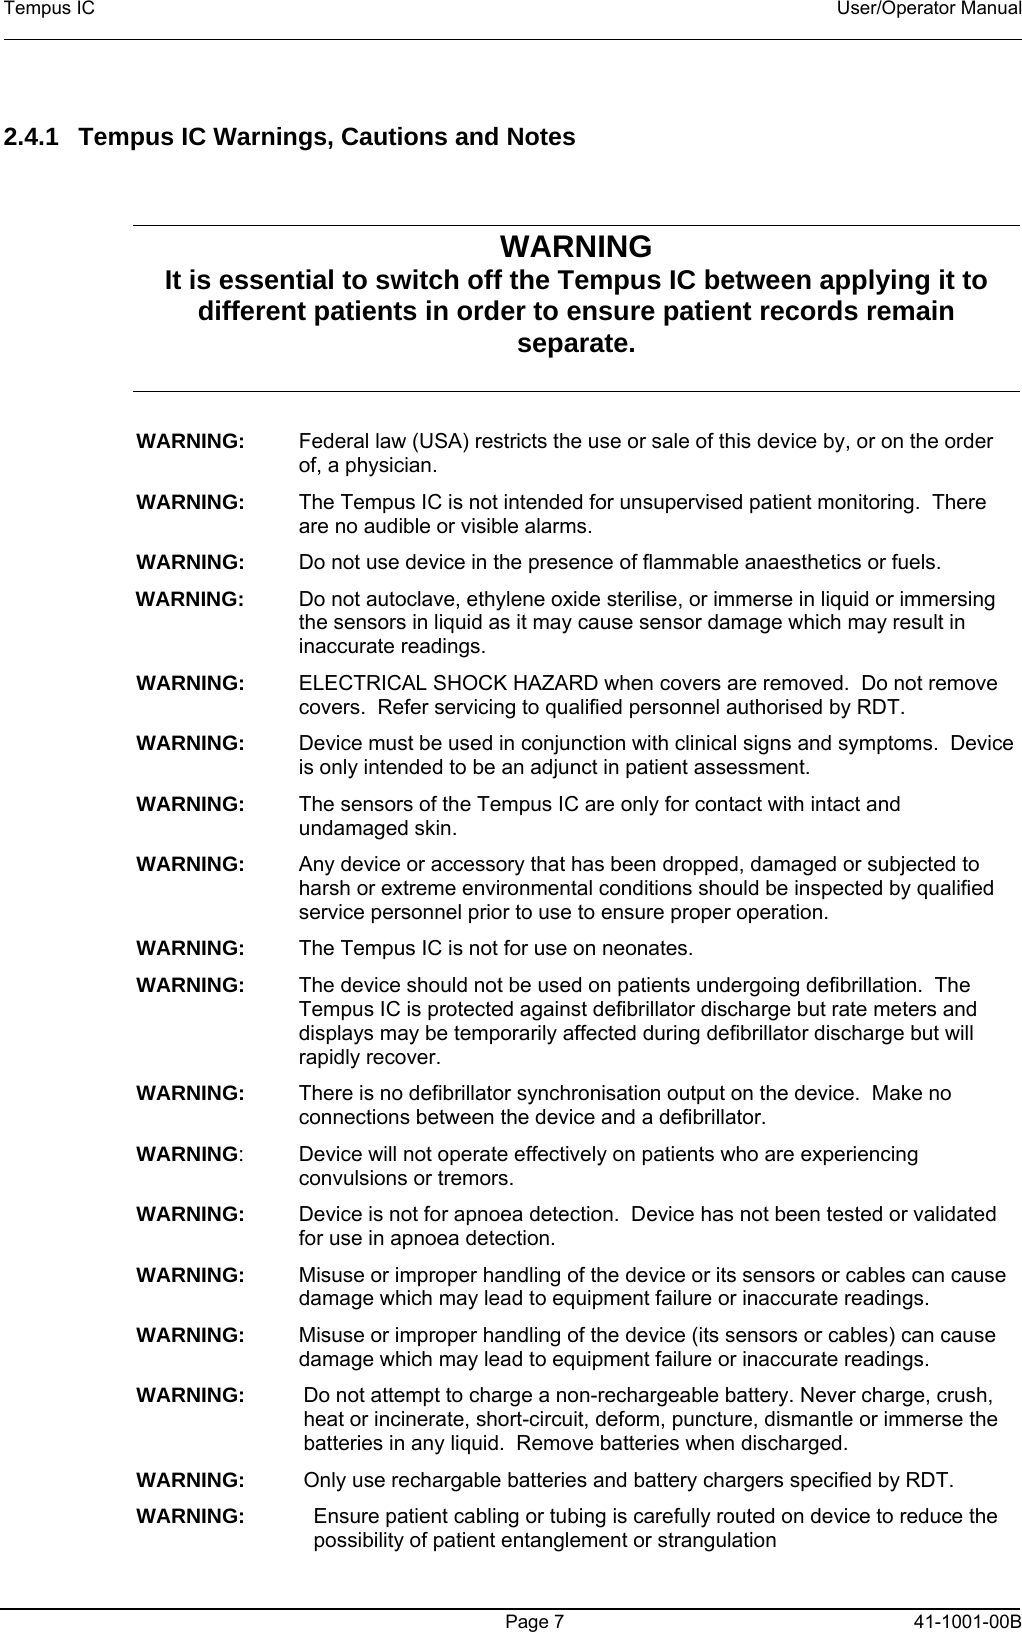 Tempus IC    User/Operator Manual     Page 7  41-1001-00B  2.4.1  Tempus IC Warnings, Cautions and Notes  WARNING  It is essential to switch off the Tempus IC between applying it to different patients in order to ensure patient records remain separate.  WARNING:  Federal law (USA) restricts the use or sale of this device by, or on the order of, a physician. WARNING:  The Tempus IC is not intended for unsupervised patient monitoring.  There are no audible or visible alarms. WARNING:  Do not use device in the presence of flammable anaesthetics or fuels. WARNING:  Do not autoclave, ethylene oxide sterilise, or immerse in liquid or immersing the sensors in liquid as it may cause sensor damage which may result in inaccurate readings. WARNING:  ELECTRICAL SHOCK HAZARD when covers are removed.  Do not remove covers.  Refer servicing to qualified personnel authorised by RDT. WARNING:  Device must be used in conjunction with clinical signs and symptoms.  Device is only intended to be an adjunct in patient assessment. WARNING:  The sensors of the Tempus IC are only for contact with intact and undamaged skin. WARNING:  Any device or accessory that has been dropped, damaged or subjected to harsh or extreme environmental conditions should be inspected by qualified service personnel prior to use to ensure proper operation. WARNING:  The Tempus IC is not for use on neonates. WARNING:  The device should not be used on patients undergoing defibrillation.  The Tempus IC is protected against defibrillator discharge but rate meters and displays may be temporarily affected during defibrillator discharge but will rapidly recover. WARNING:  There is no defibrillator synchronisation output on the device.  Make no connections between the device and a defibrillator.   WARNING:  Device will not operate effectively on patients who are experiencing convulsions or tremors. WARNING:  Device is not for apnoea detection.  Device has not been tested or validated for use in apnoea detection. WARNING:  Misuse or improper handling of the device or its sensors or cables can cause damage which may lead to equipment failure or inaccurate readings. WARNING:  Misuse or improper handling of the device (its sensors or cables) can cause damage which may lead to equipment failure or inaccurate readings. WARNING:  Do not attempt to charge a non-rechargeable battery. Never charge, crush, heat or incinerate, short-circuit, deform, puncture, dismantle or immerse the batteries in any liquid.  Remove batteries when discharged. WARNING:  Only use rechargable batteries and battery chargers specified by RDT. WARNING:   Ensure patient cabling or tubing is carefully routed on device to reduce the possibility of patient entanglement or strangulation 